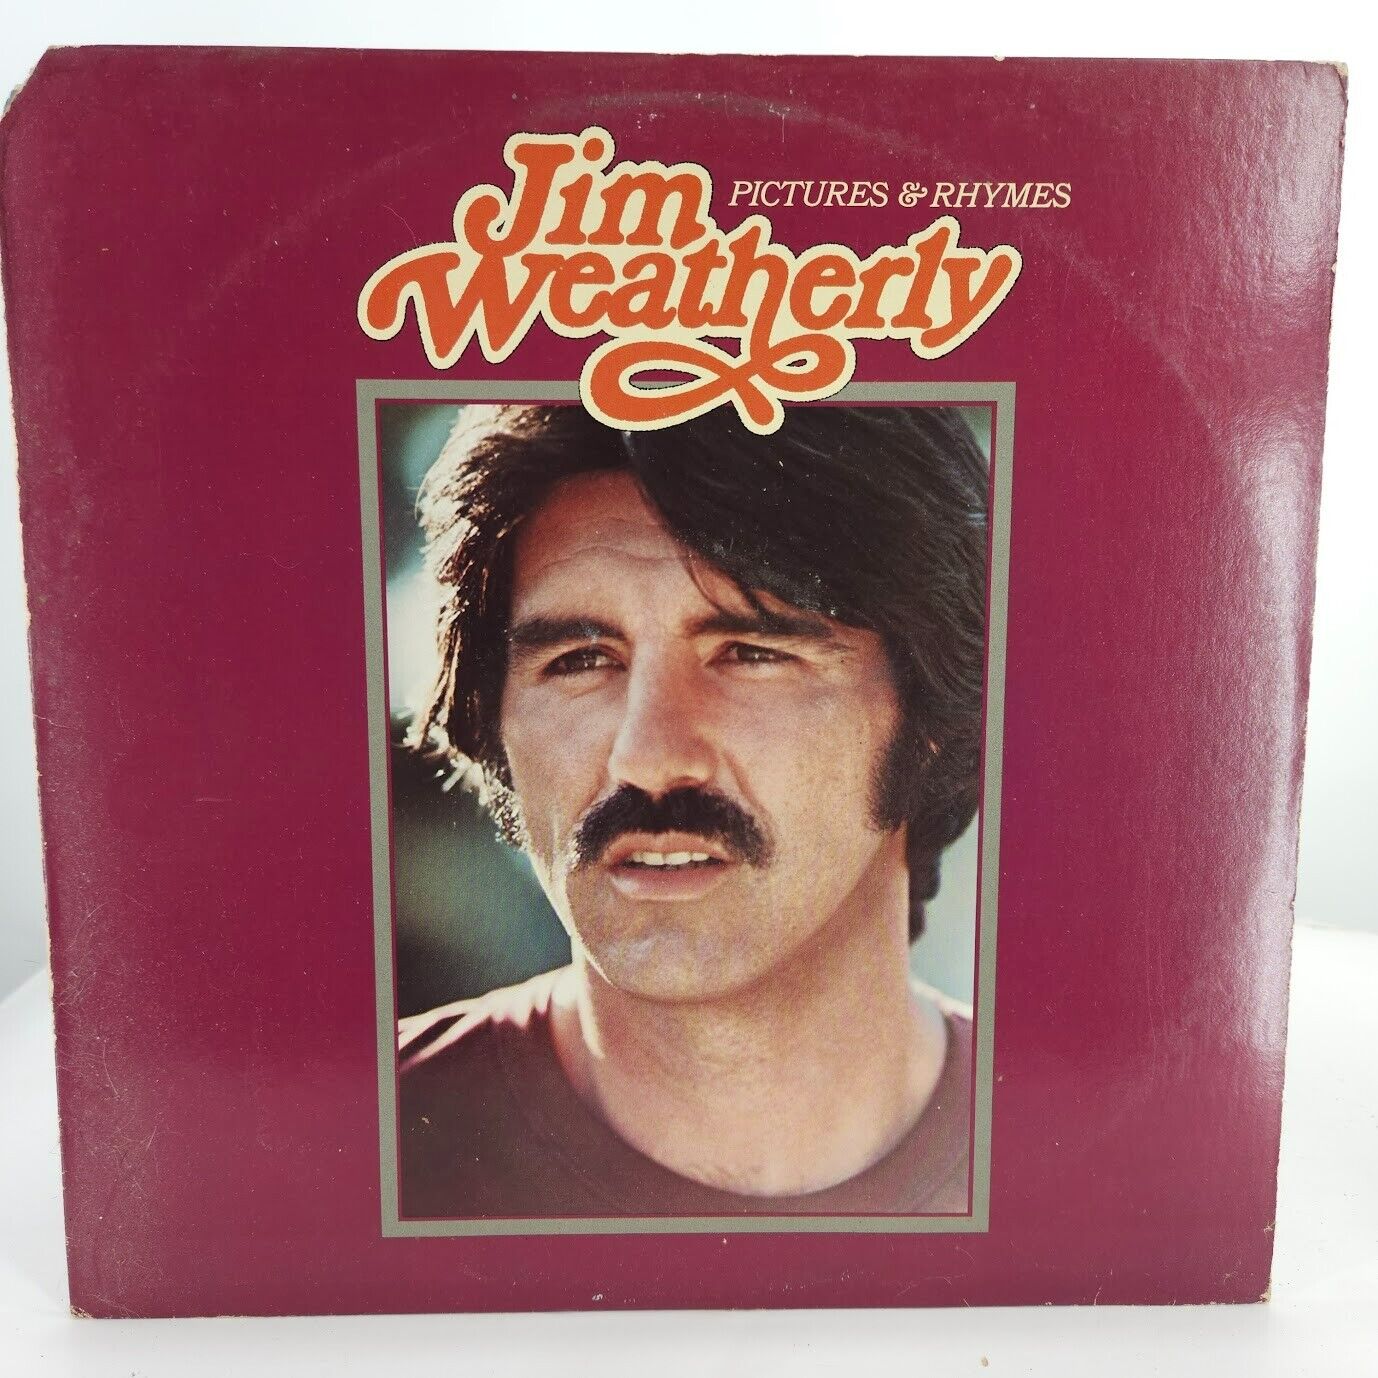 Jim Weatherly Album Vinyl 1976 ABC Records Stereo Country Rock Pictures & Rhymes